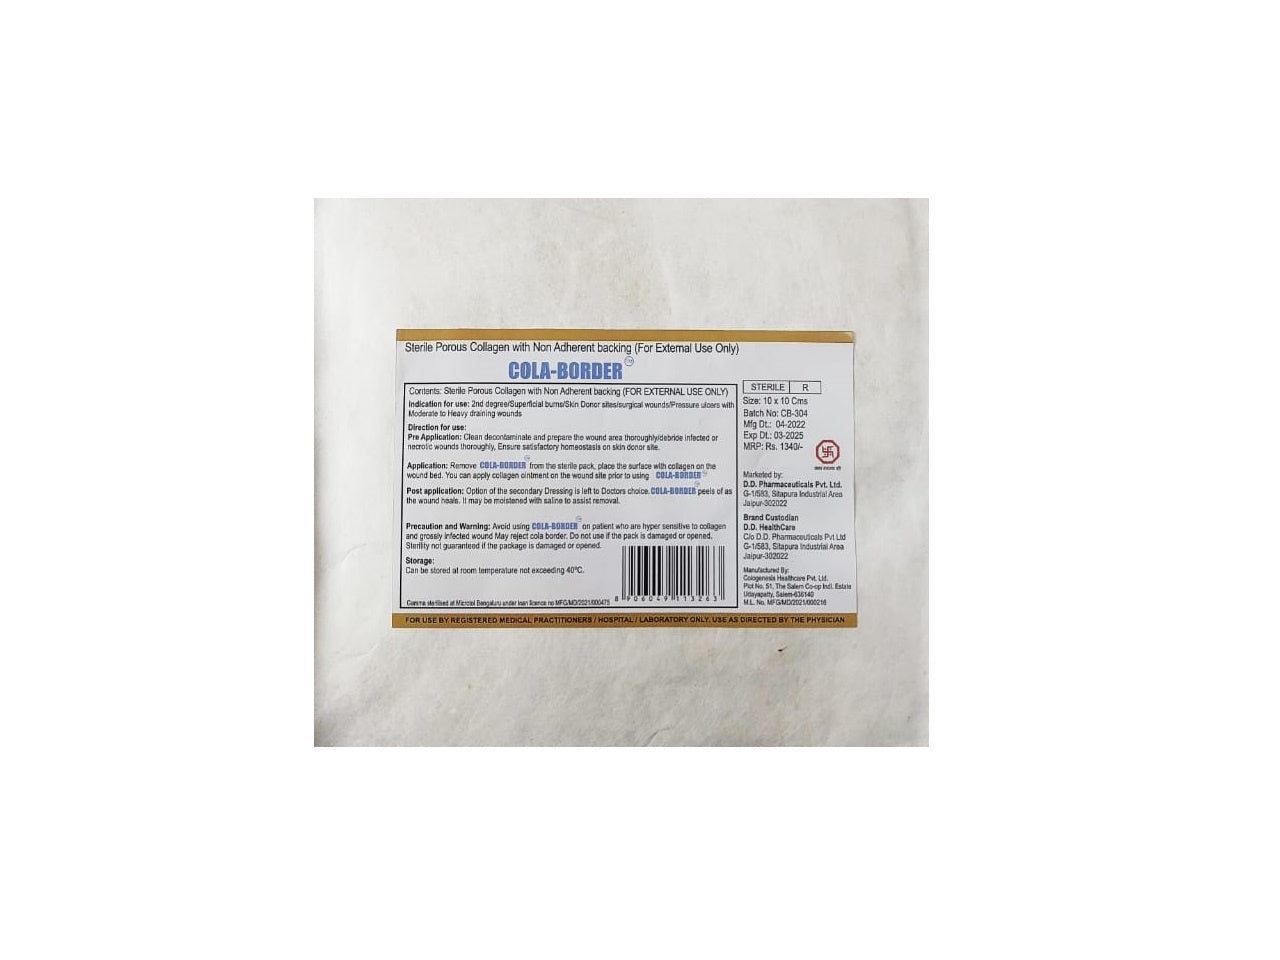 Cola Border (Sterile Porous Collagen with Non Adherent Backing) Wound Dressing 10x10cm